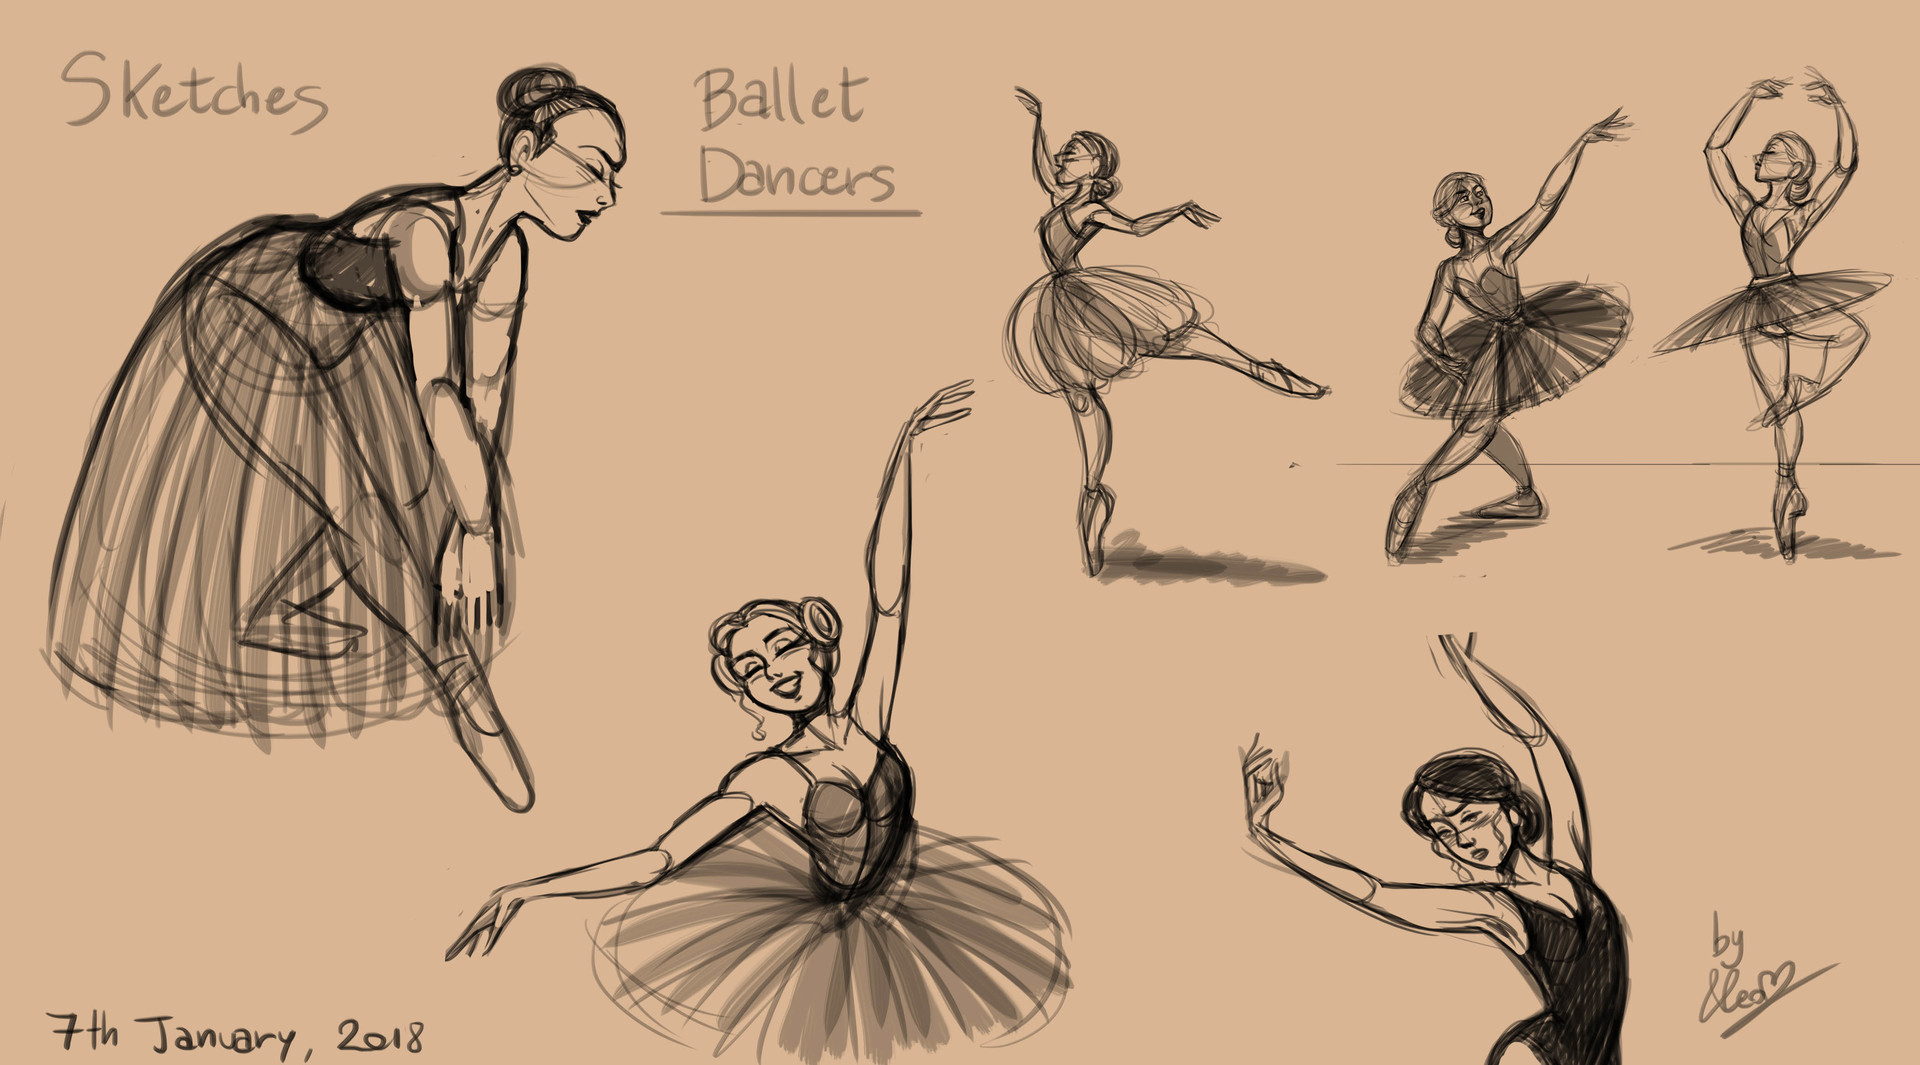 Dancer pose training hand drawing style Royalty Free Vector